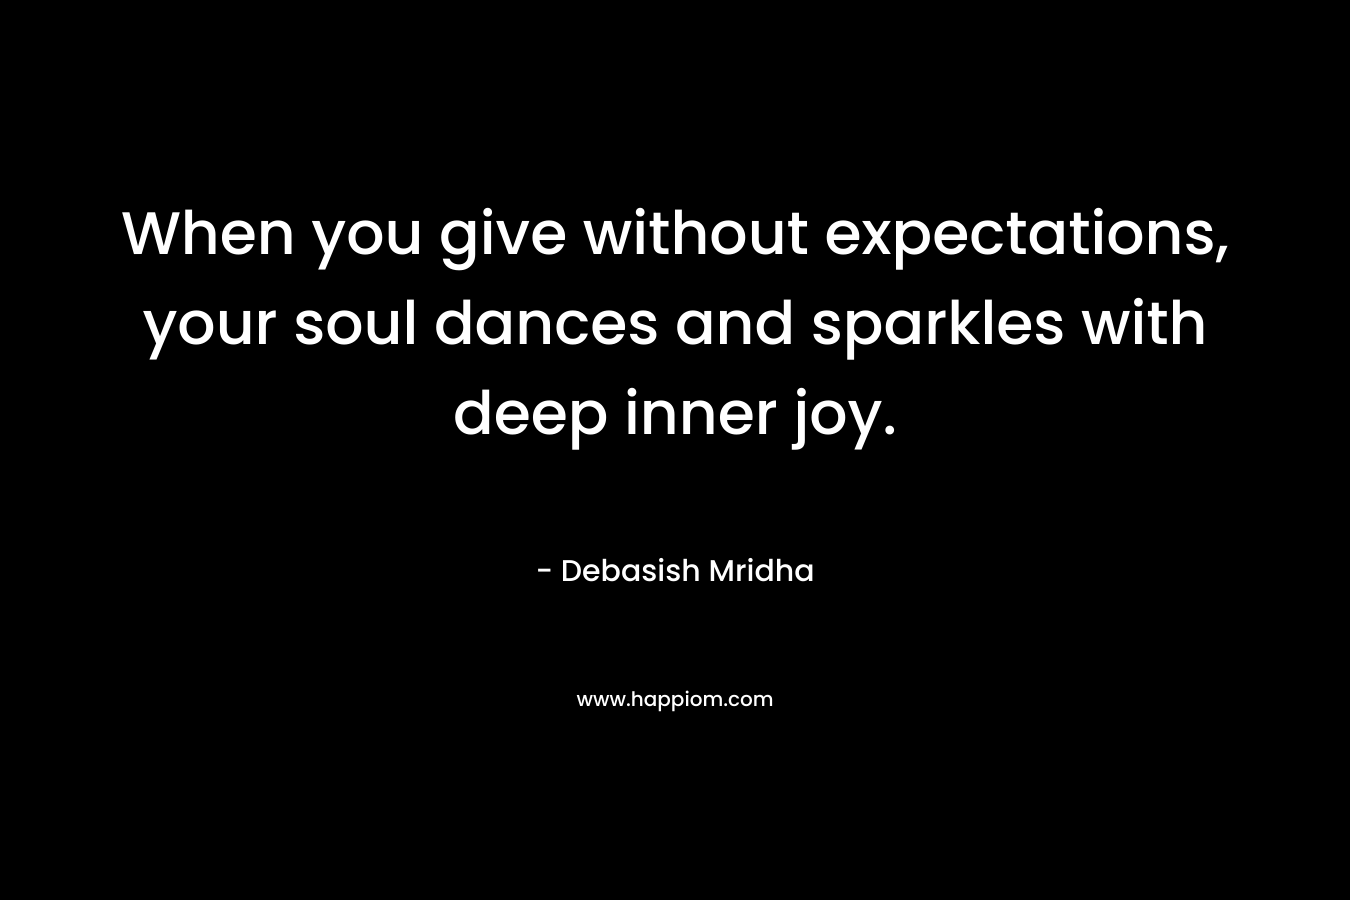 When you give without expectations, your soul dances and sparkles with deep inner joy. – Debasish Mridha